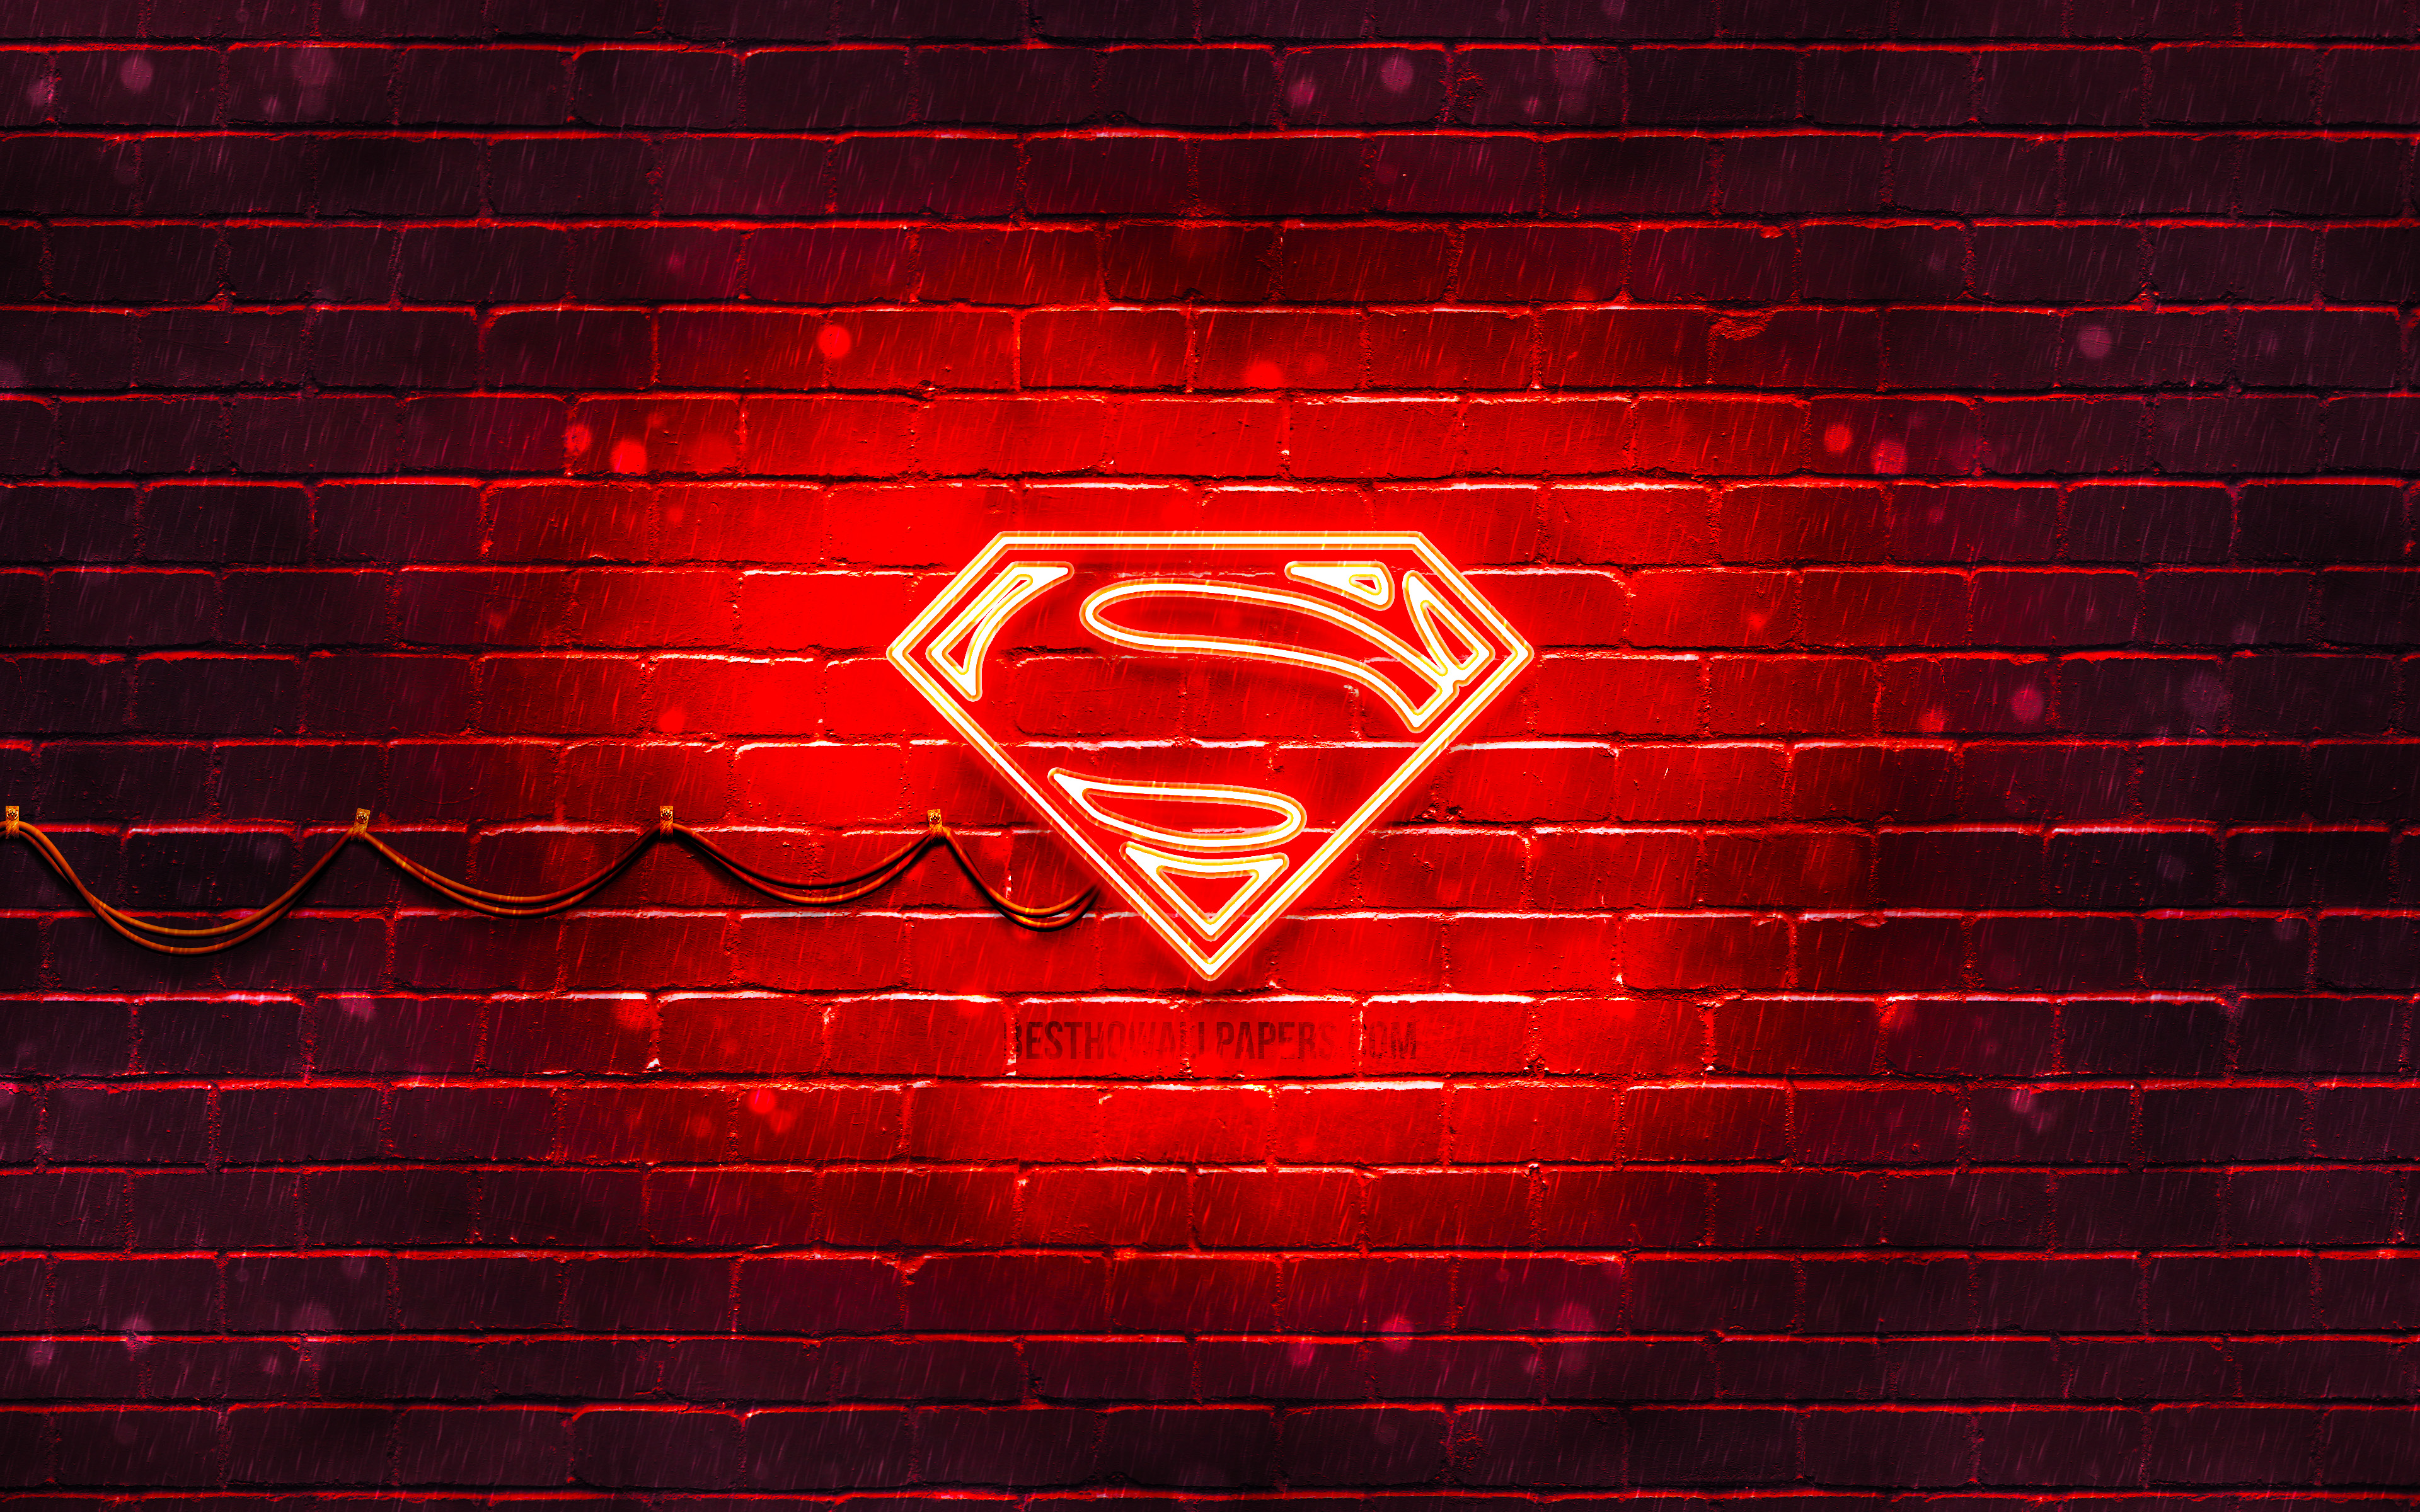 Download wallpaper Superman red logo, 4k, red brickwall, Superman logo, superheroes, Superman neon logo, Superman for desktop with resolution 3840x2400. High Quality HD picture wallpaper